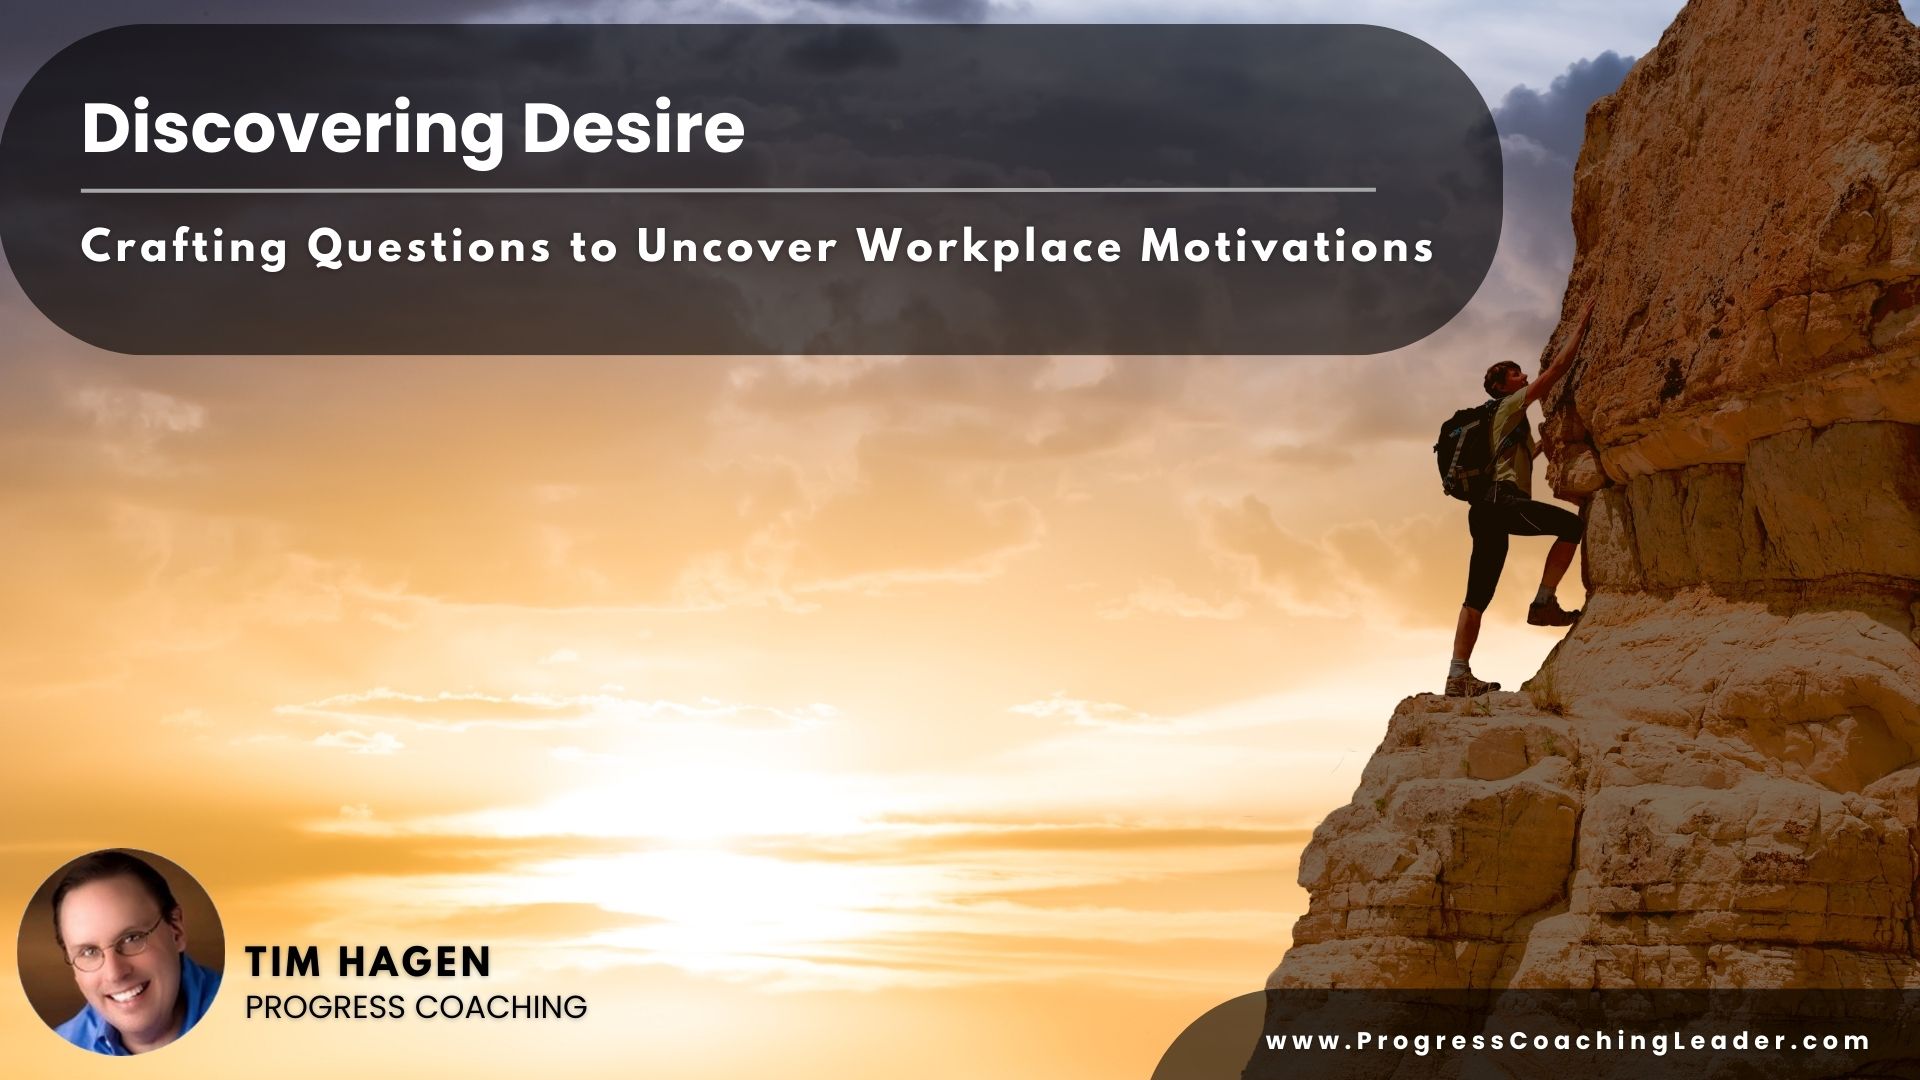 Discovering Desire: Crafting Questions to Uncover Workplace Motivations